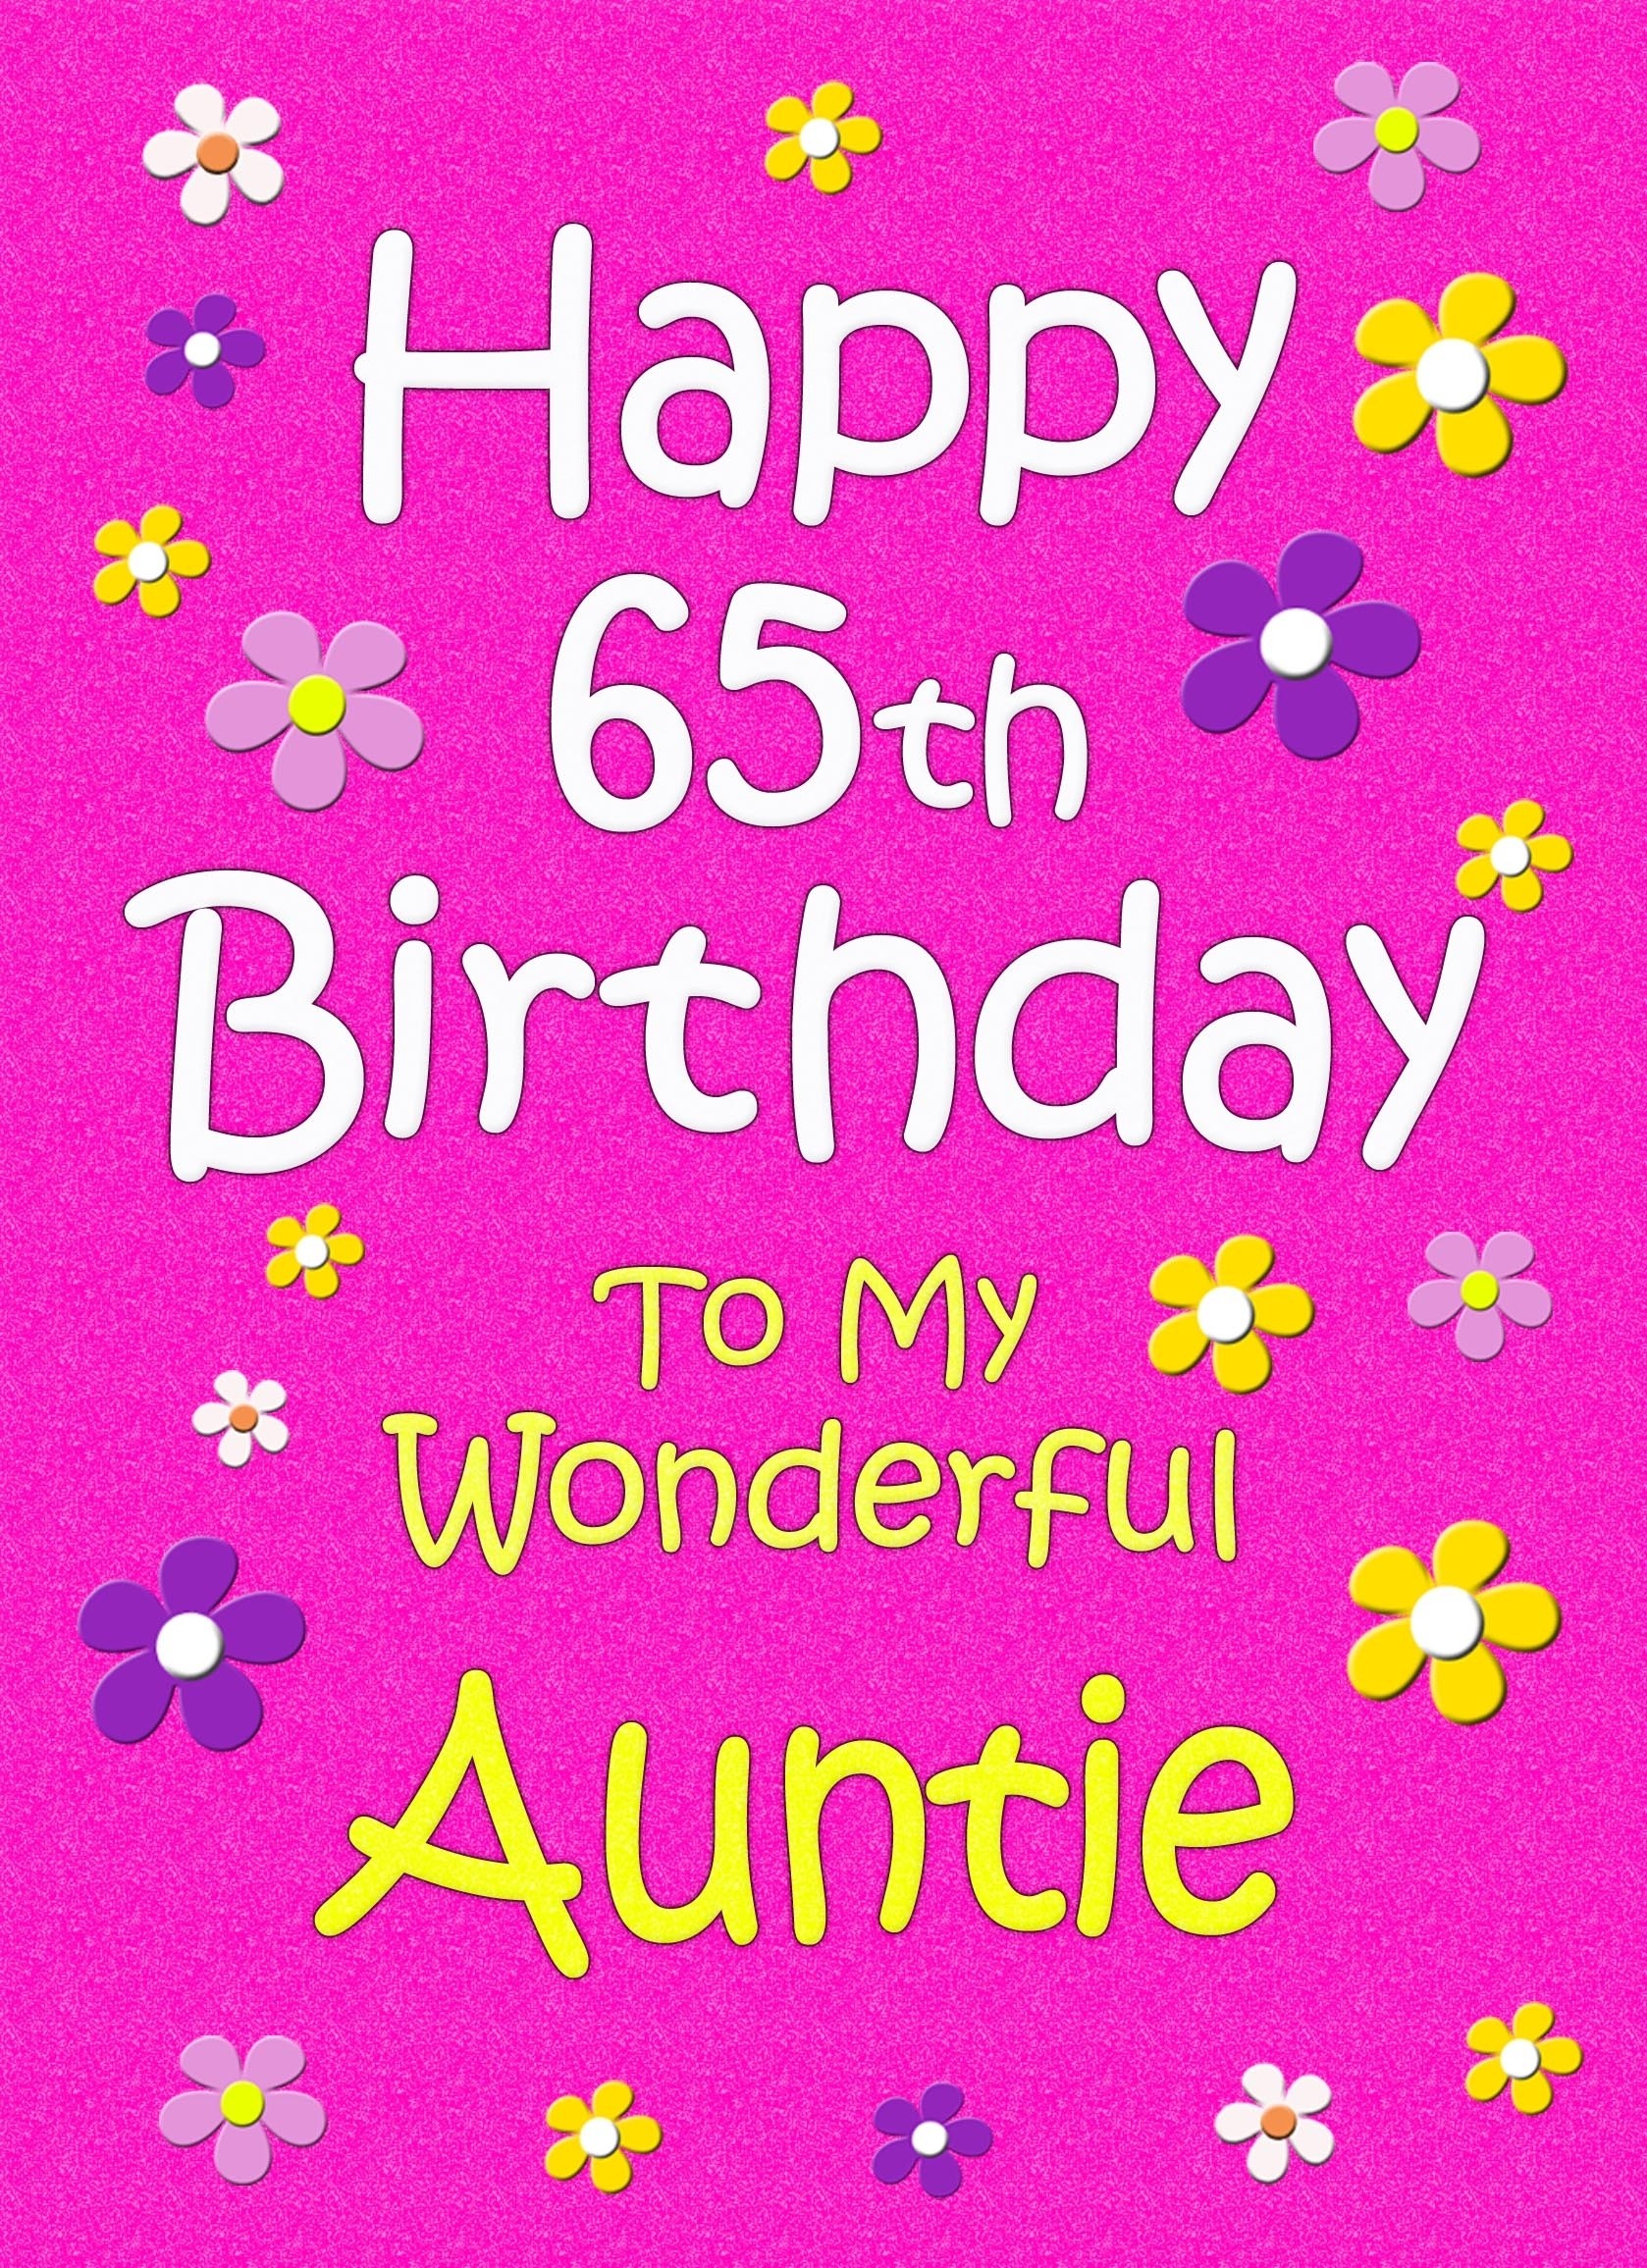 Auntie 65th Birthday Card (Pink)